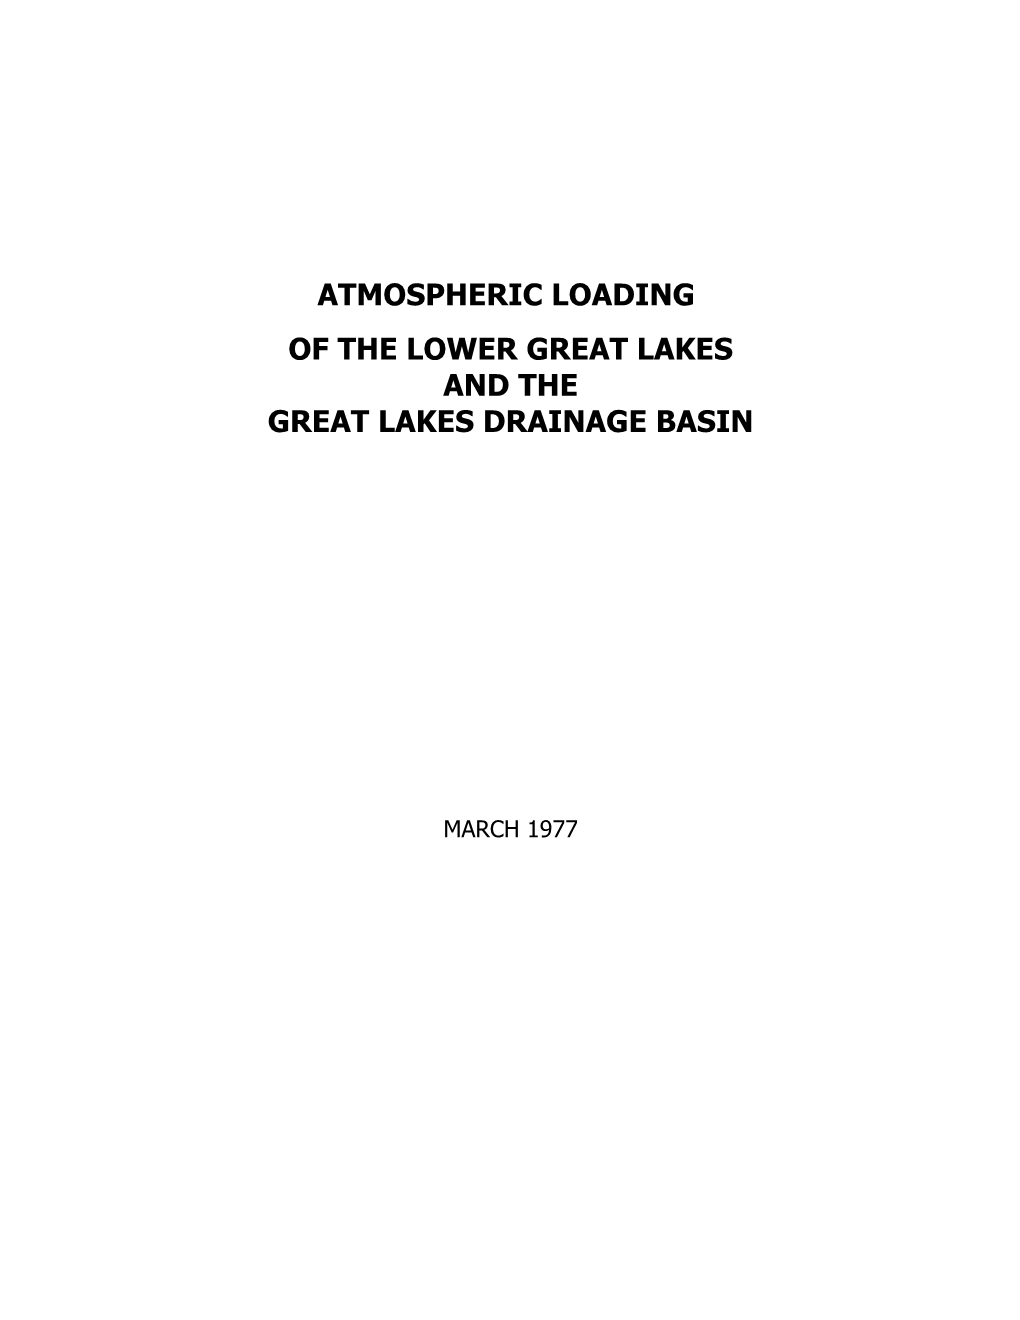 Atmospheric Loading of the Lower Great Lakes and the Great Lakes Drainage Basin